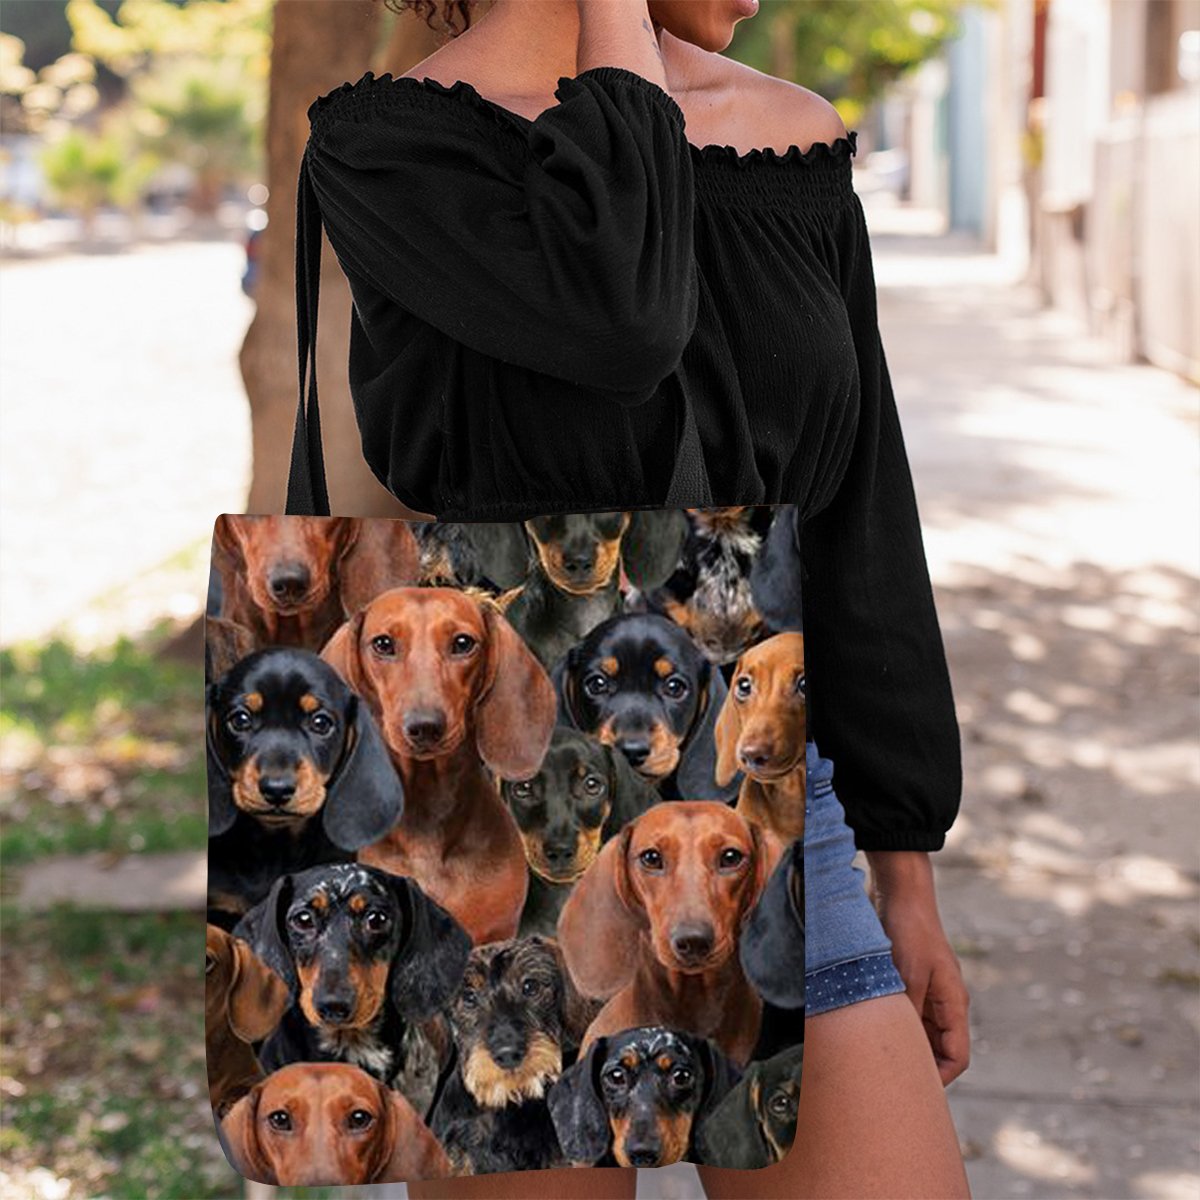 A Bunch Of Dachshunds Tote Bag